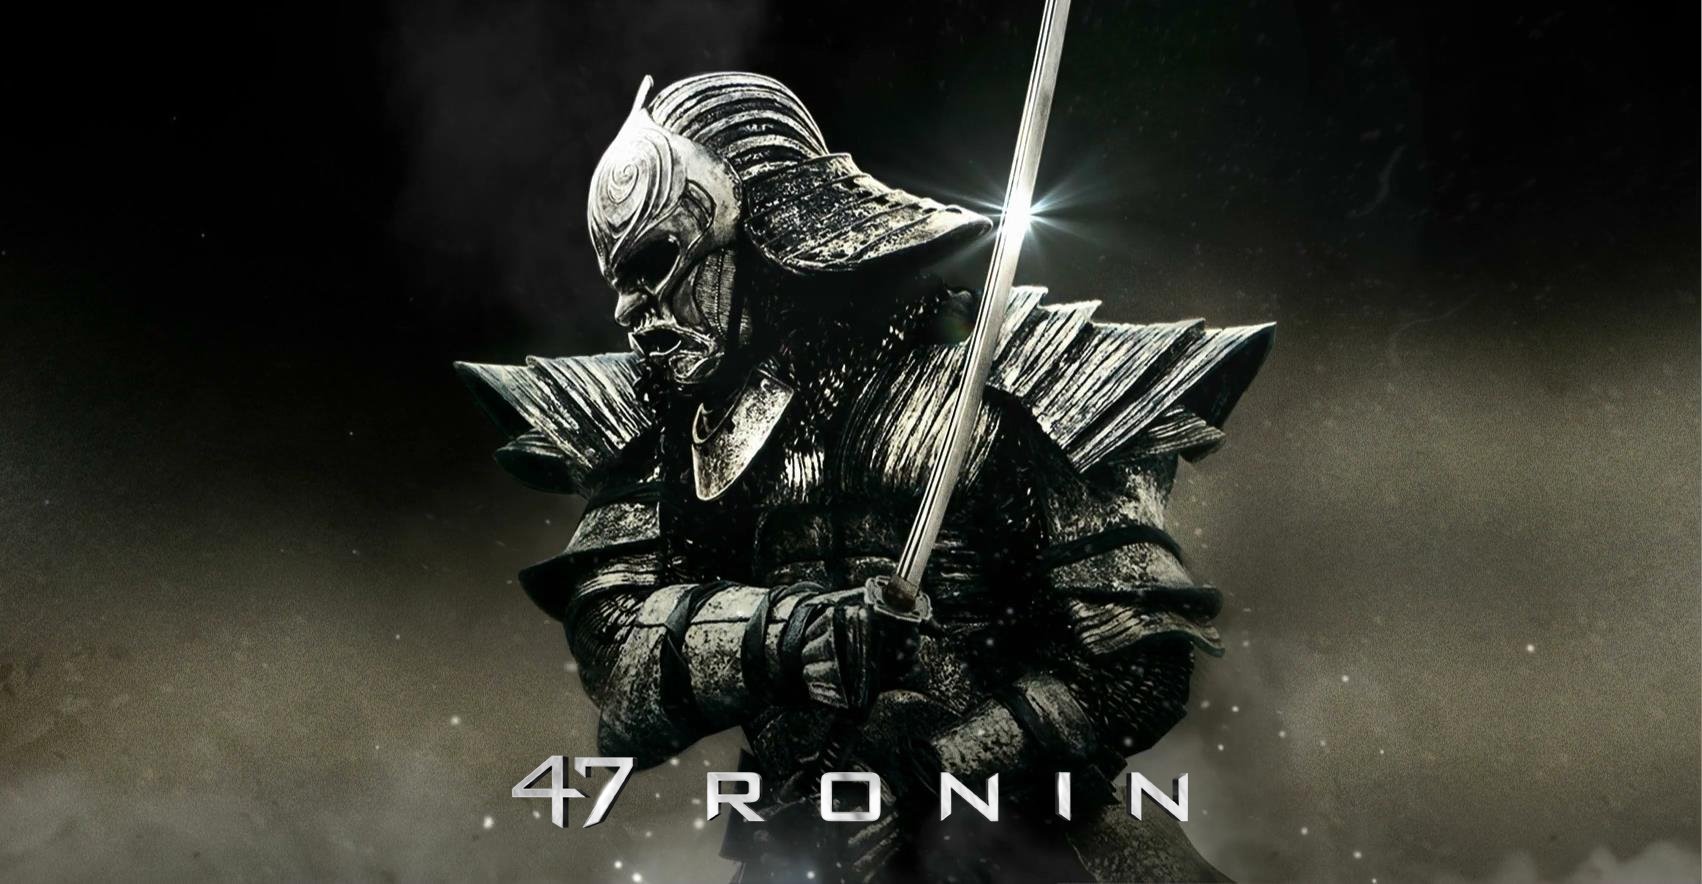 47 ronin wallpaper,darkness,fictional character,font,graphic design,action figure